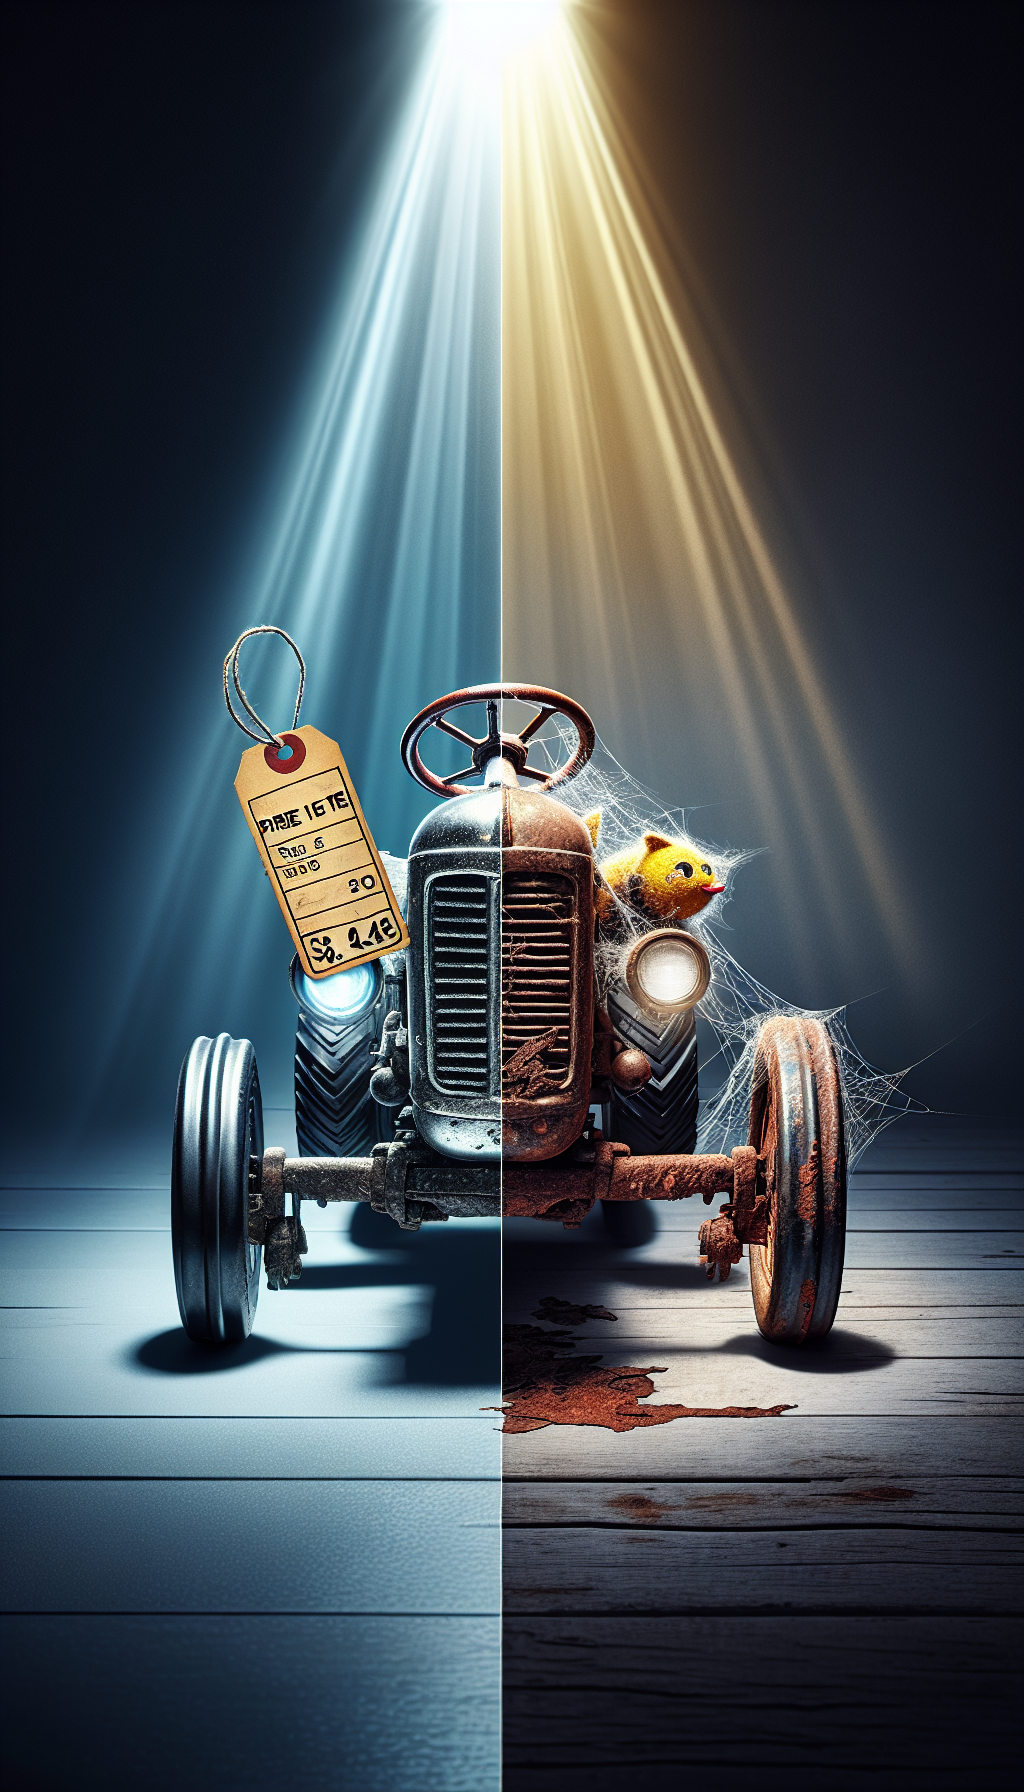 An illustration depicts split imagery; on one side, a gleaming, restored antique pedal tractor bathed in a spotlight with a price tag hanging from its handle, showcasing its high value. On the other, a rusted counterpart sits neglected with a diminished price tag, cobwebs implying its long-standing disrepair. Vintage style price tags and a glimmer effect demonstrate the contrast in conditions and values.